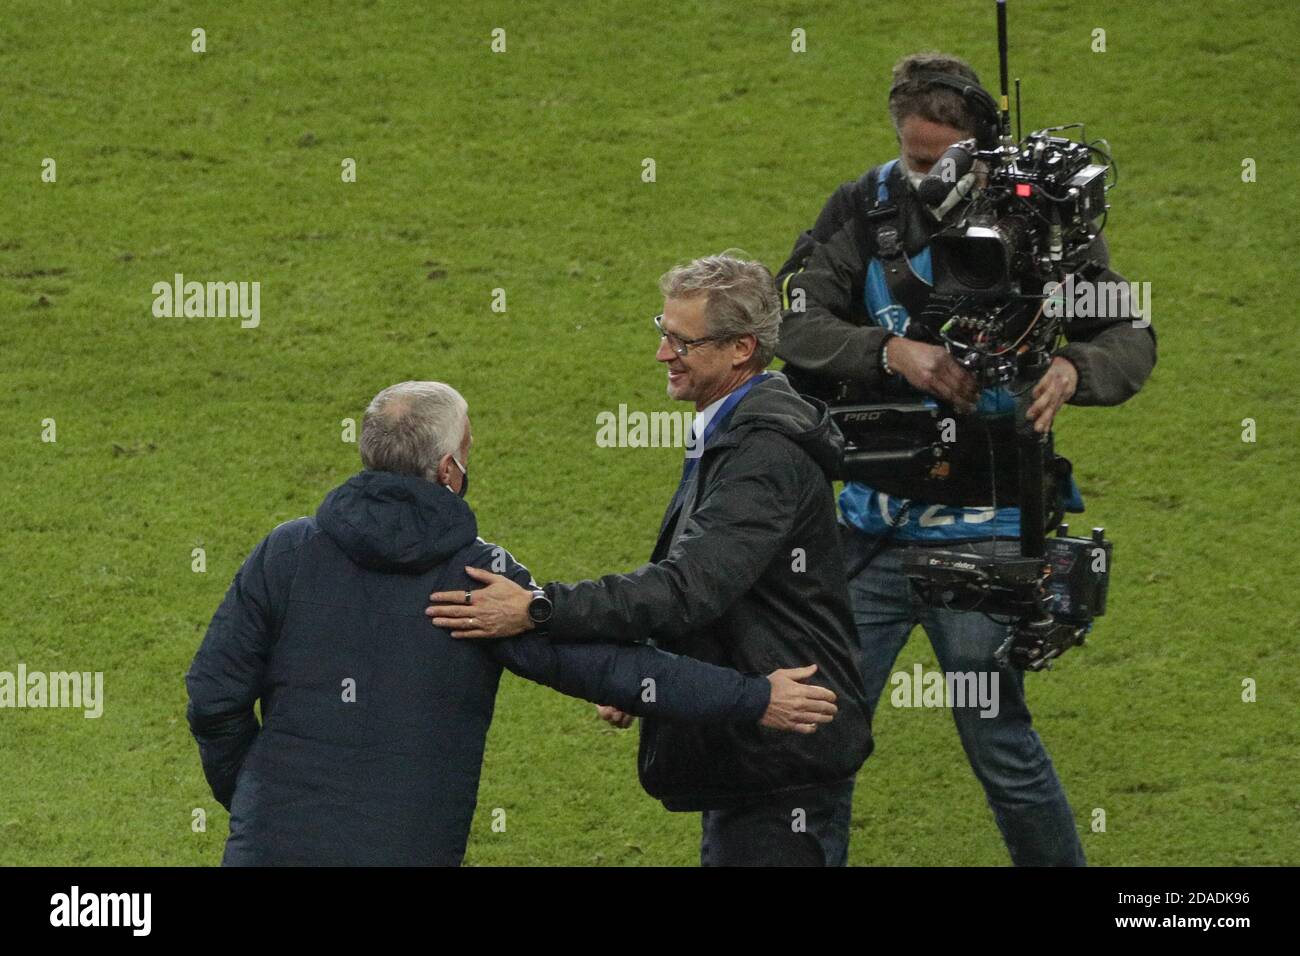 Didier Deschamps (FRA) greet Markku Kanerva (FIN) at the end of the game during the International Friendly Game football match between France and Fi P Stock Photo